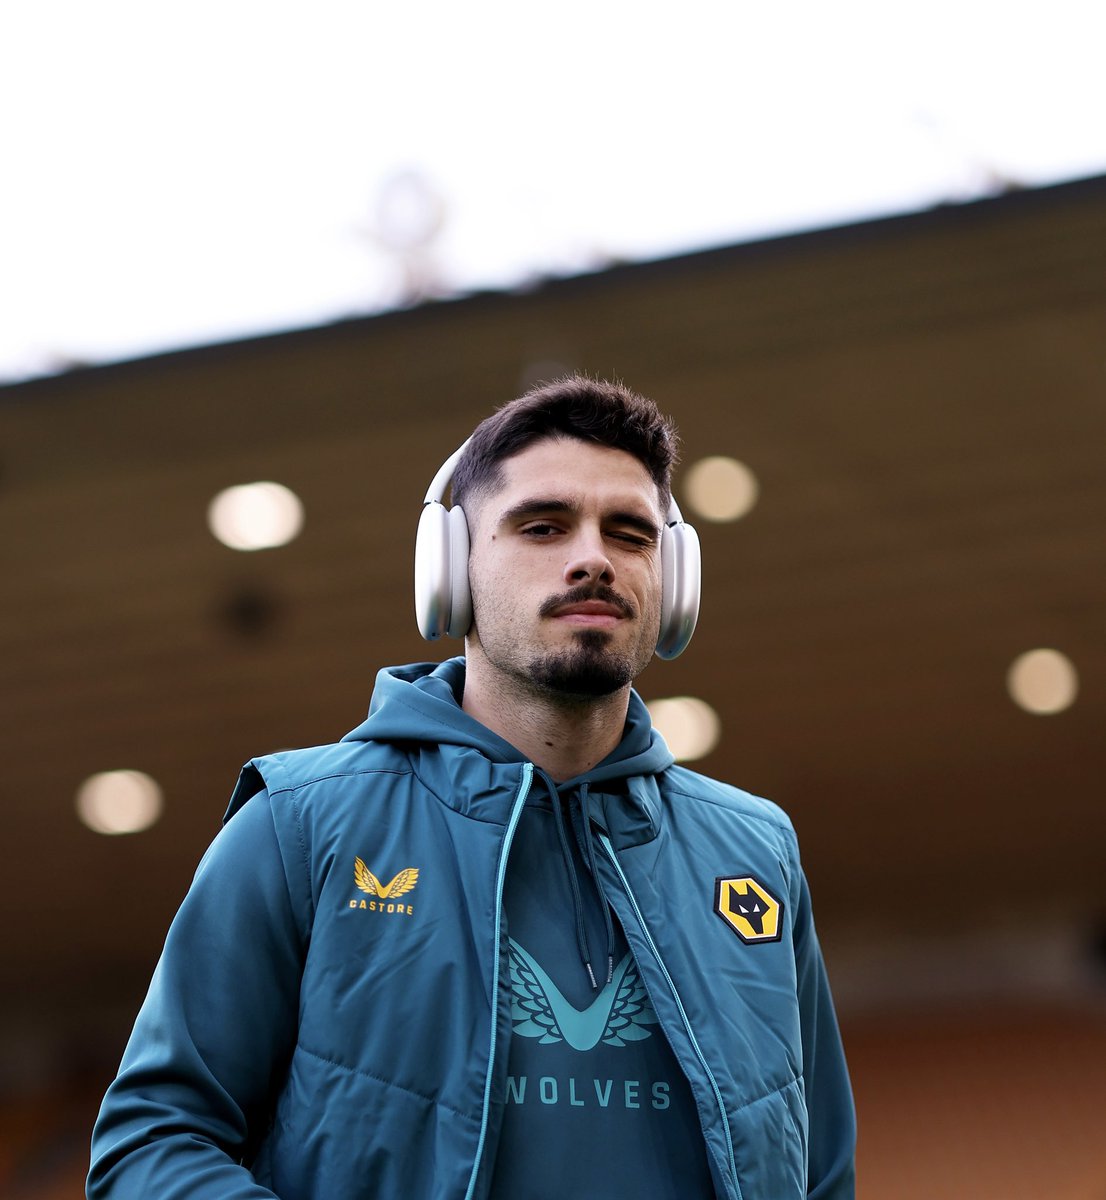 Apart from all the noise i am here to say that I will be out for a couple of weeks, but very soon I will be out there stronger then before. Already focused on my recovery. See you soon 😁🐺🖤💛